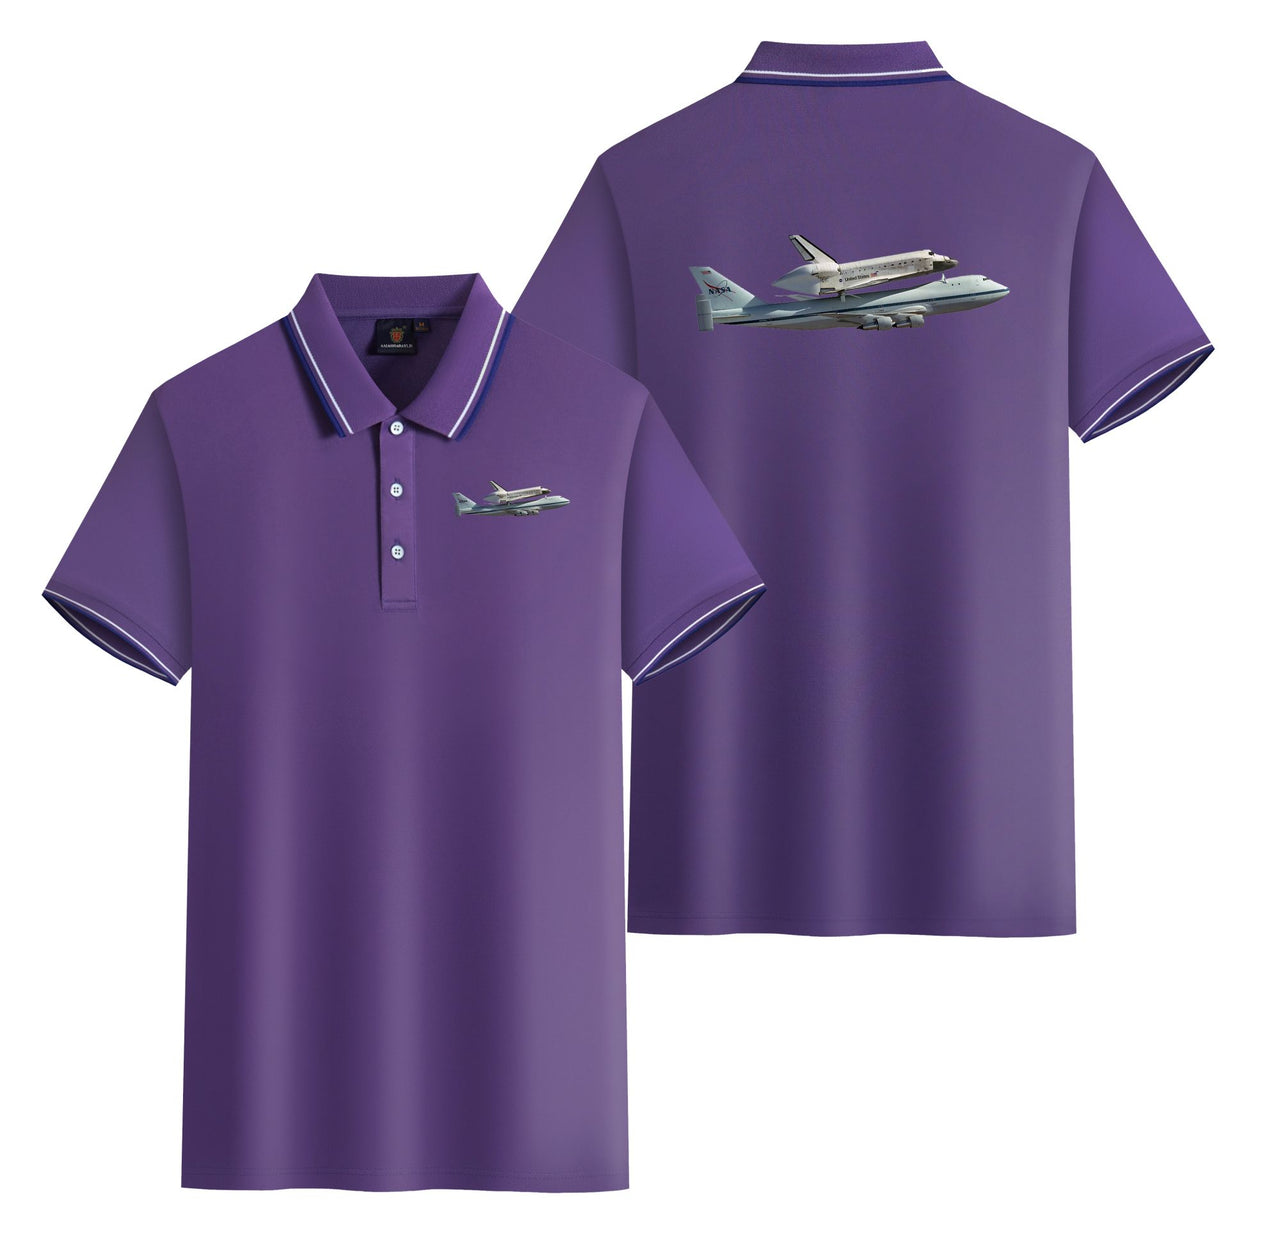 Space shuttle on 747 Designed Stylish Polo T-Shirts (Double-Side)